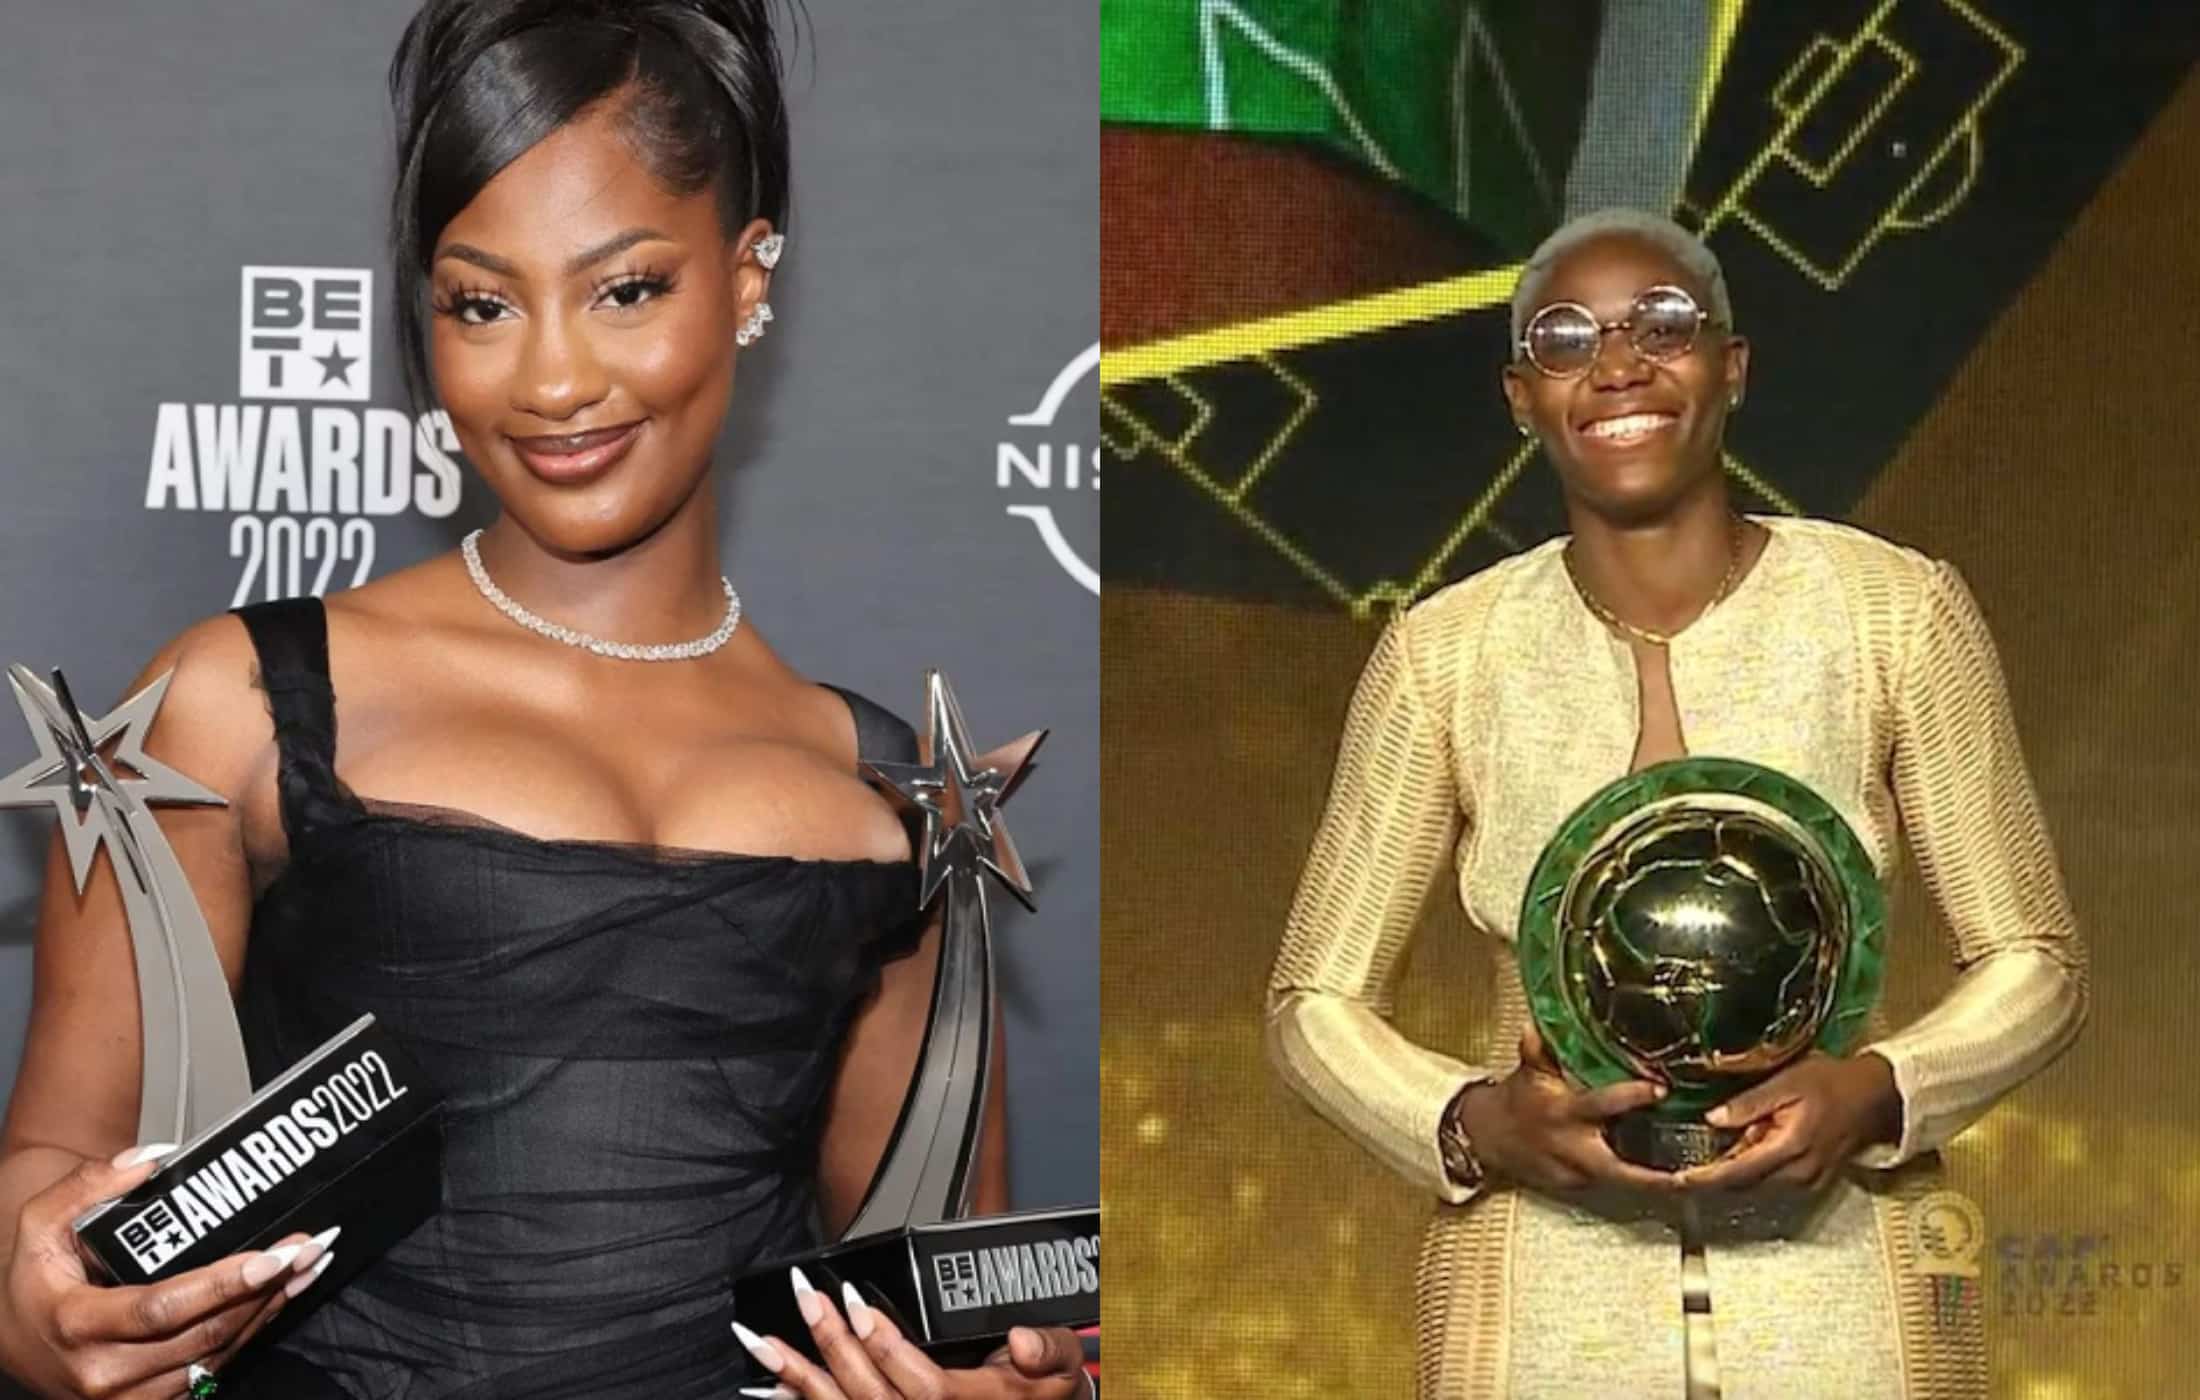 4 Nigerian Female stars who achieved world recognitions and awards recently